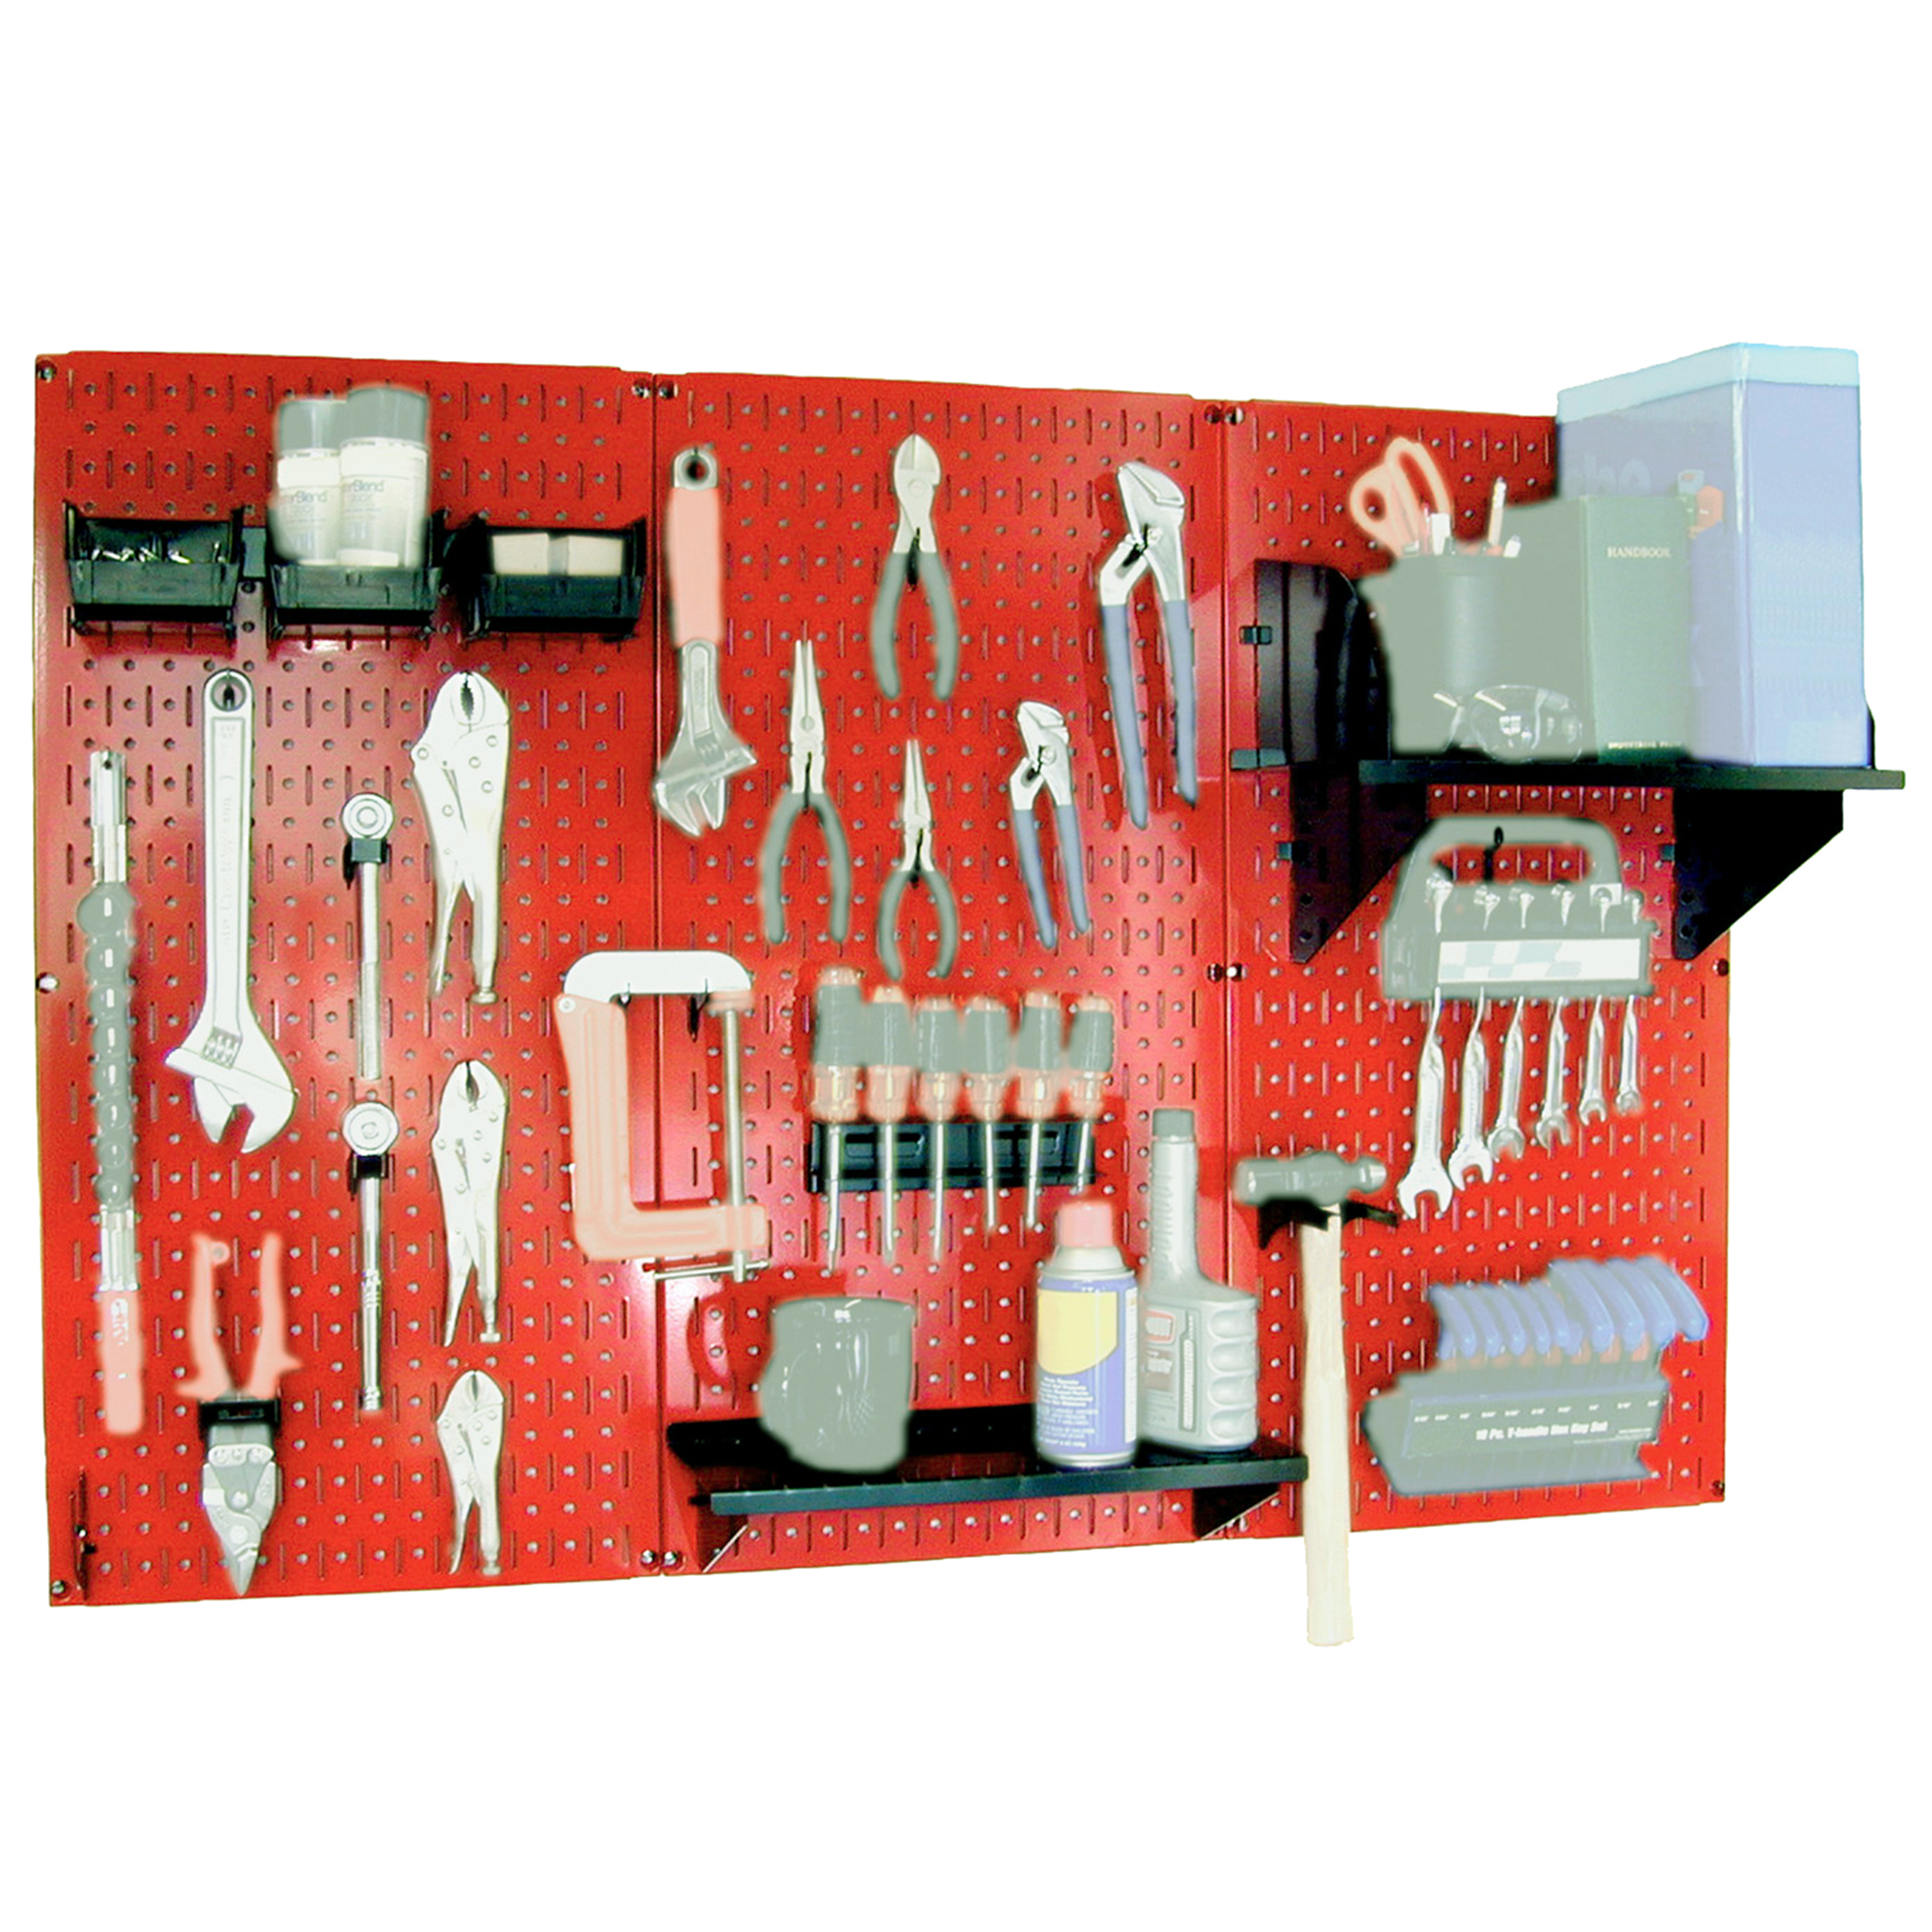 Steel Pegboard, Standard Workbench Kit In Red With Black Accessories